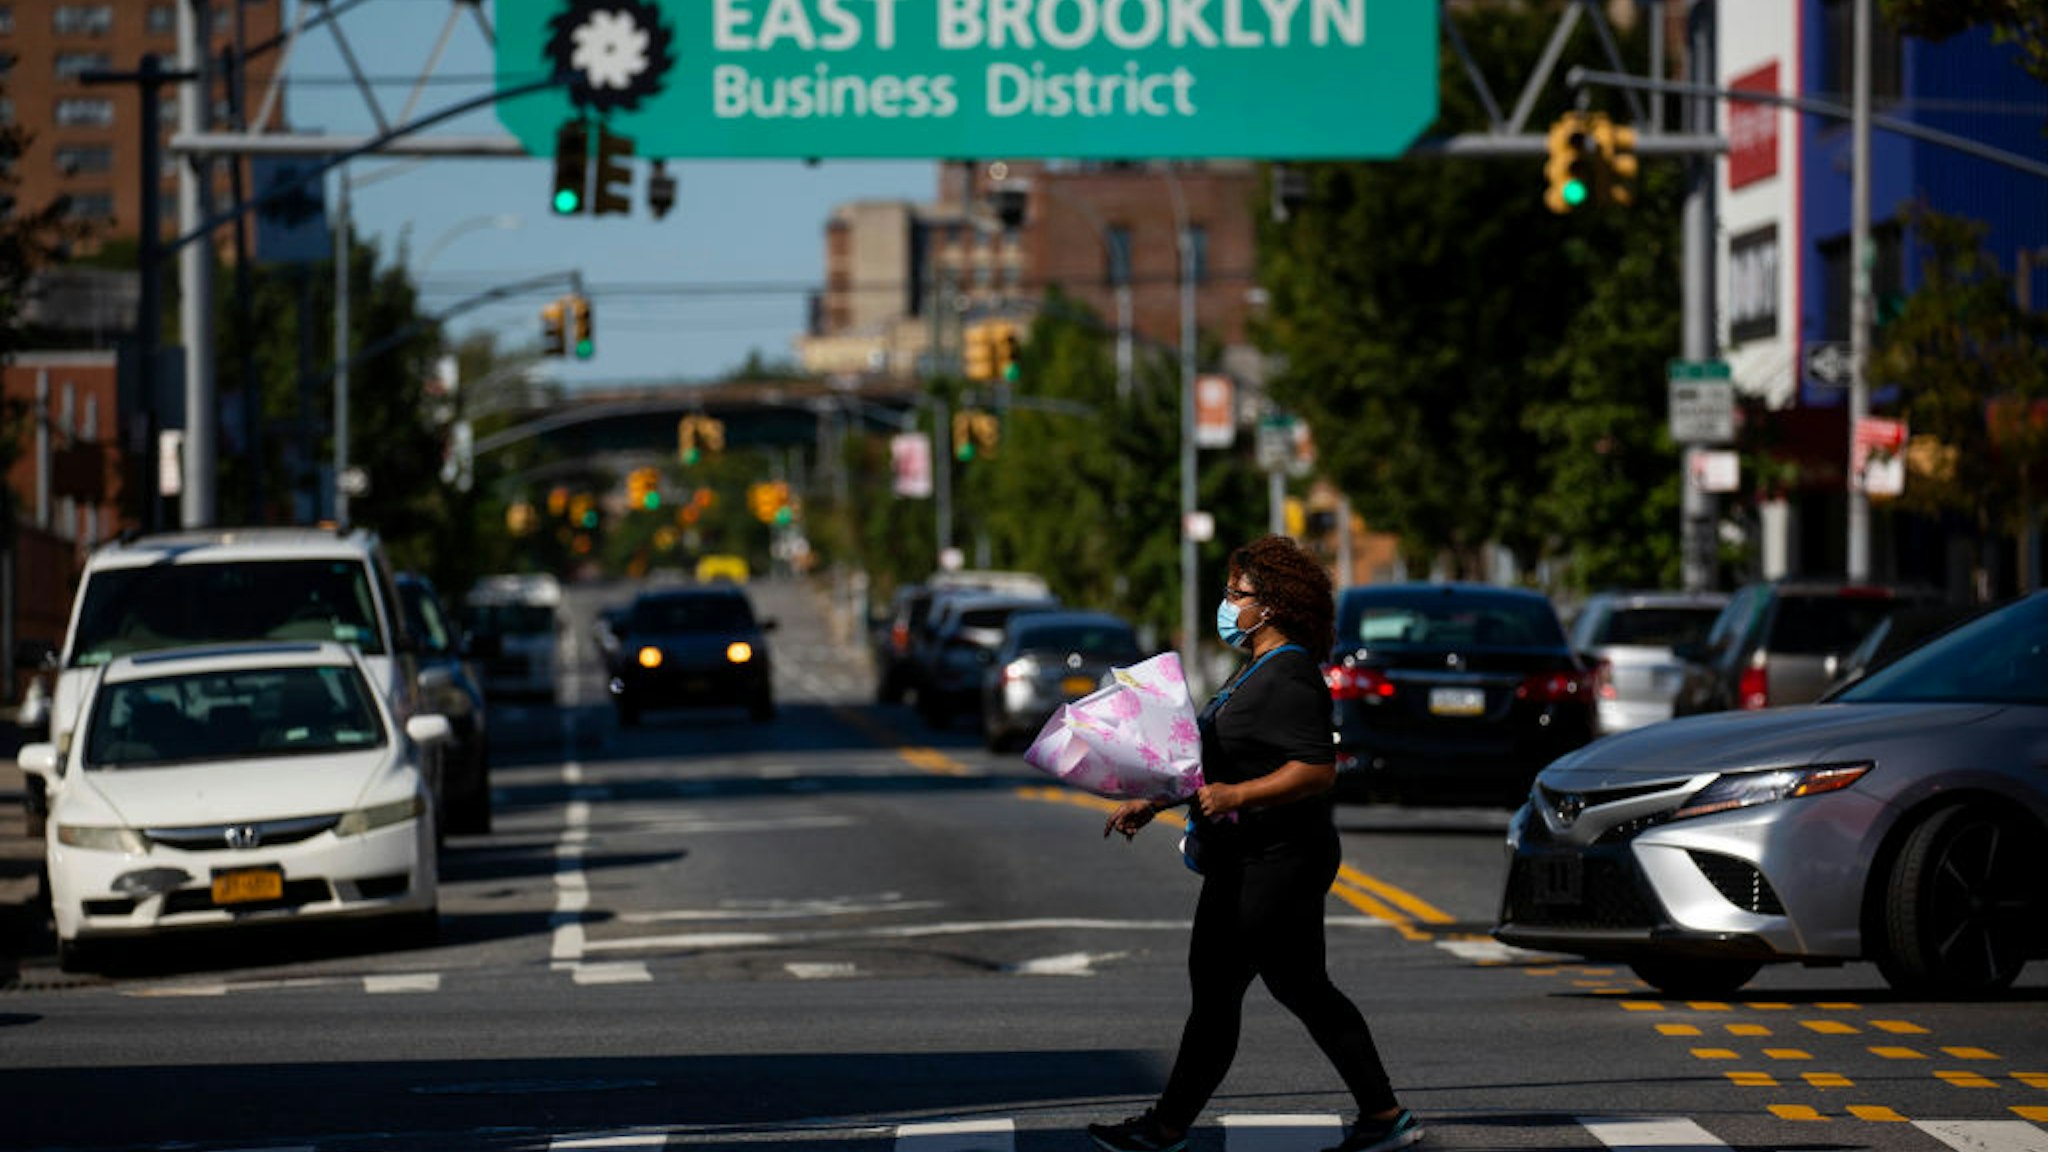 https://www.gettyimages.com/detail/news-photo/pedestrian-crosses-pennsylvania-avenue-in-the-75th-precinct-news-photo/1235857862